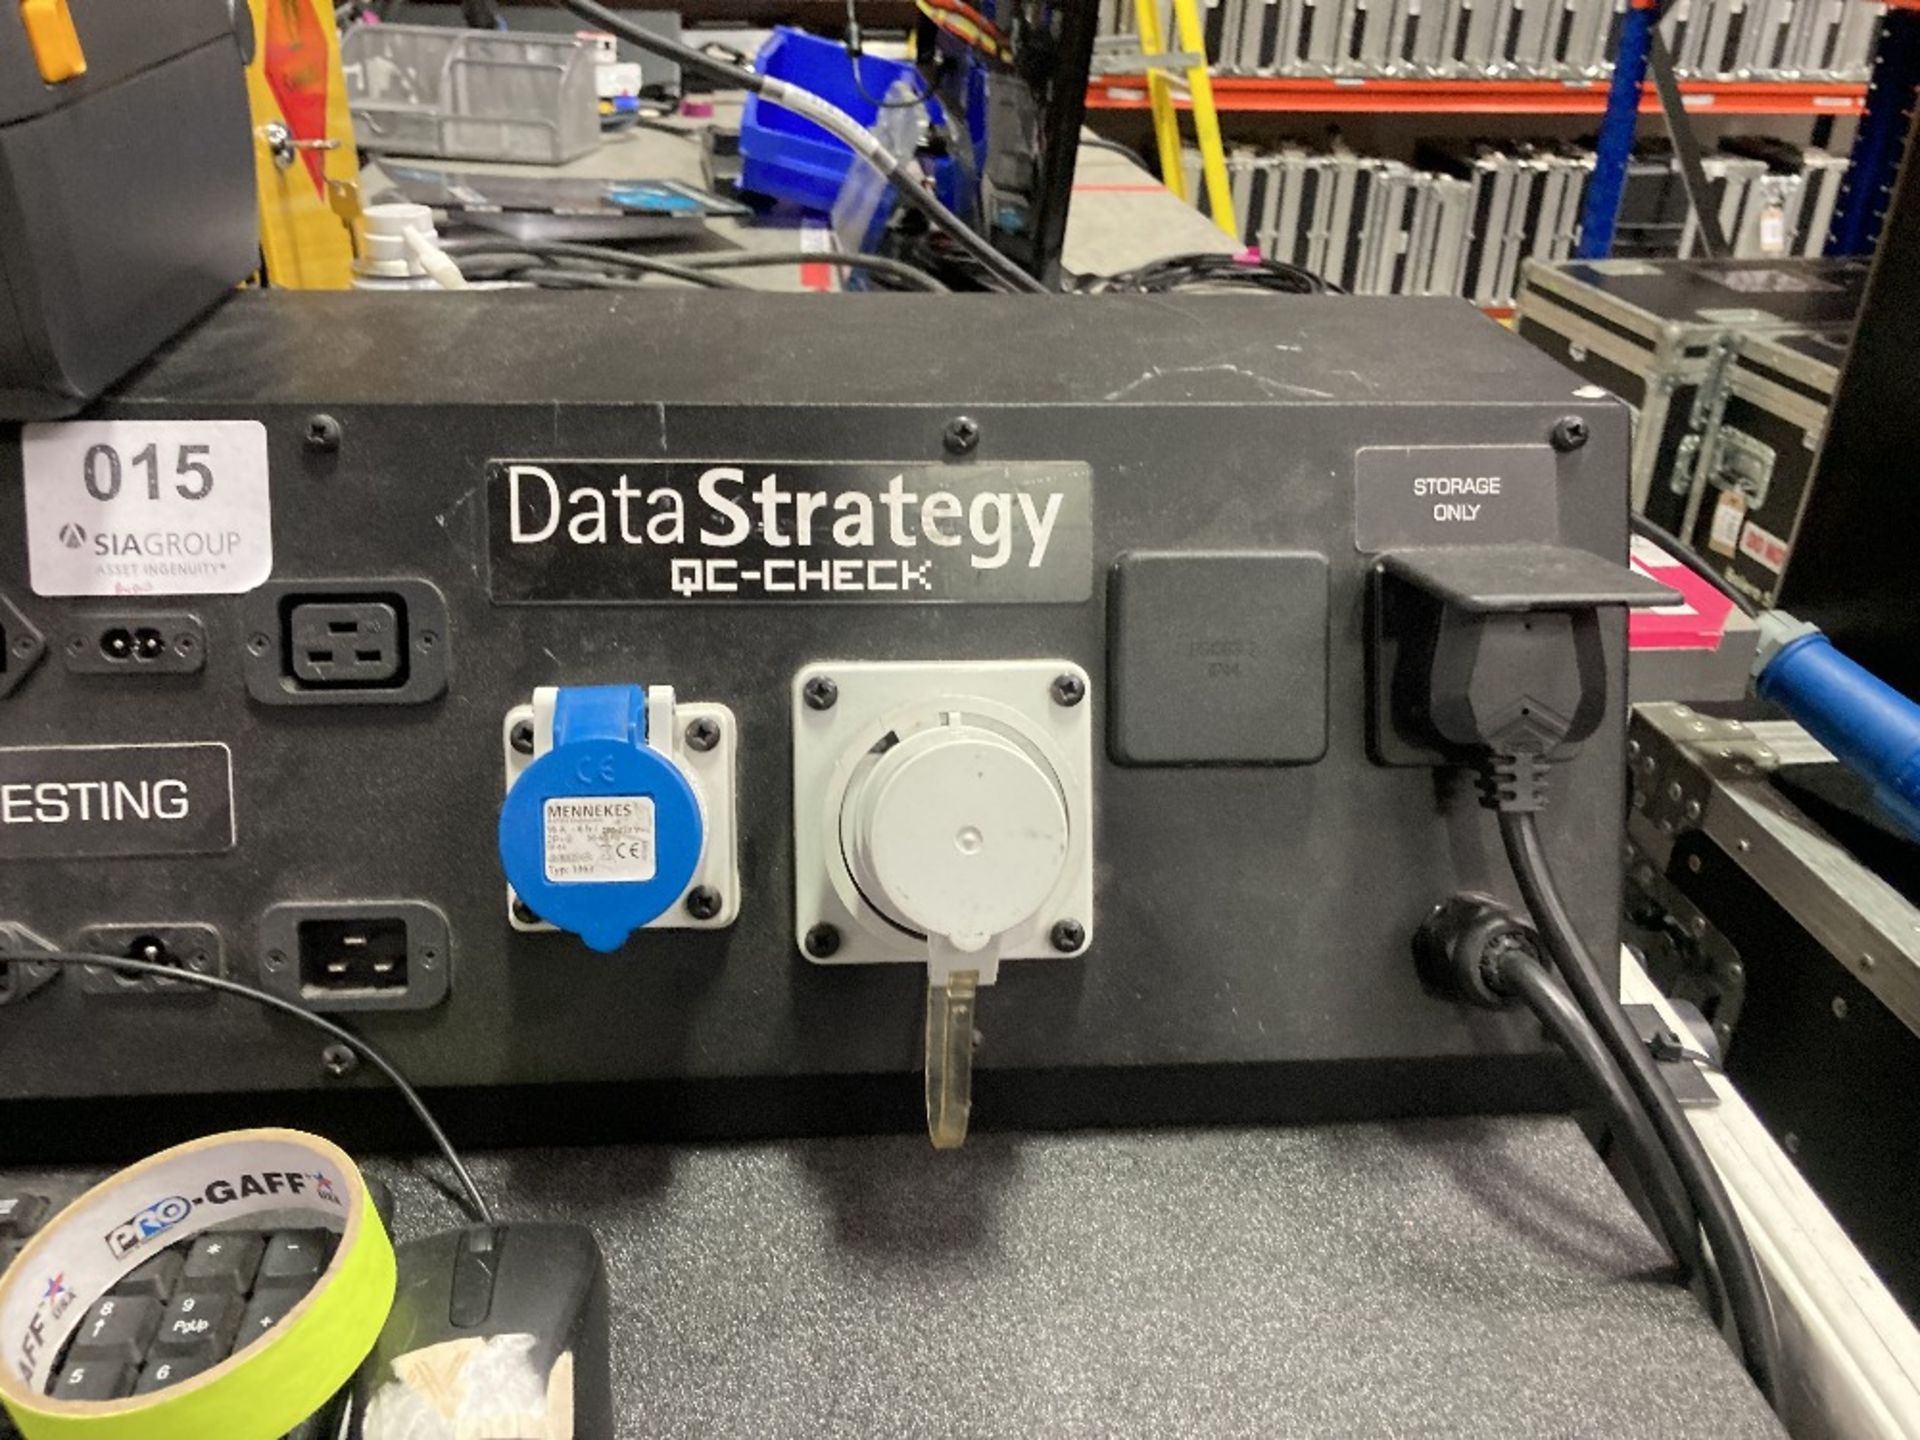 Data Strategy QC-Check Desk Mount Portable Appliance Test Processor PAT-4 - Image 4 of 9